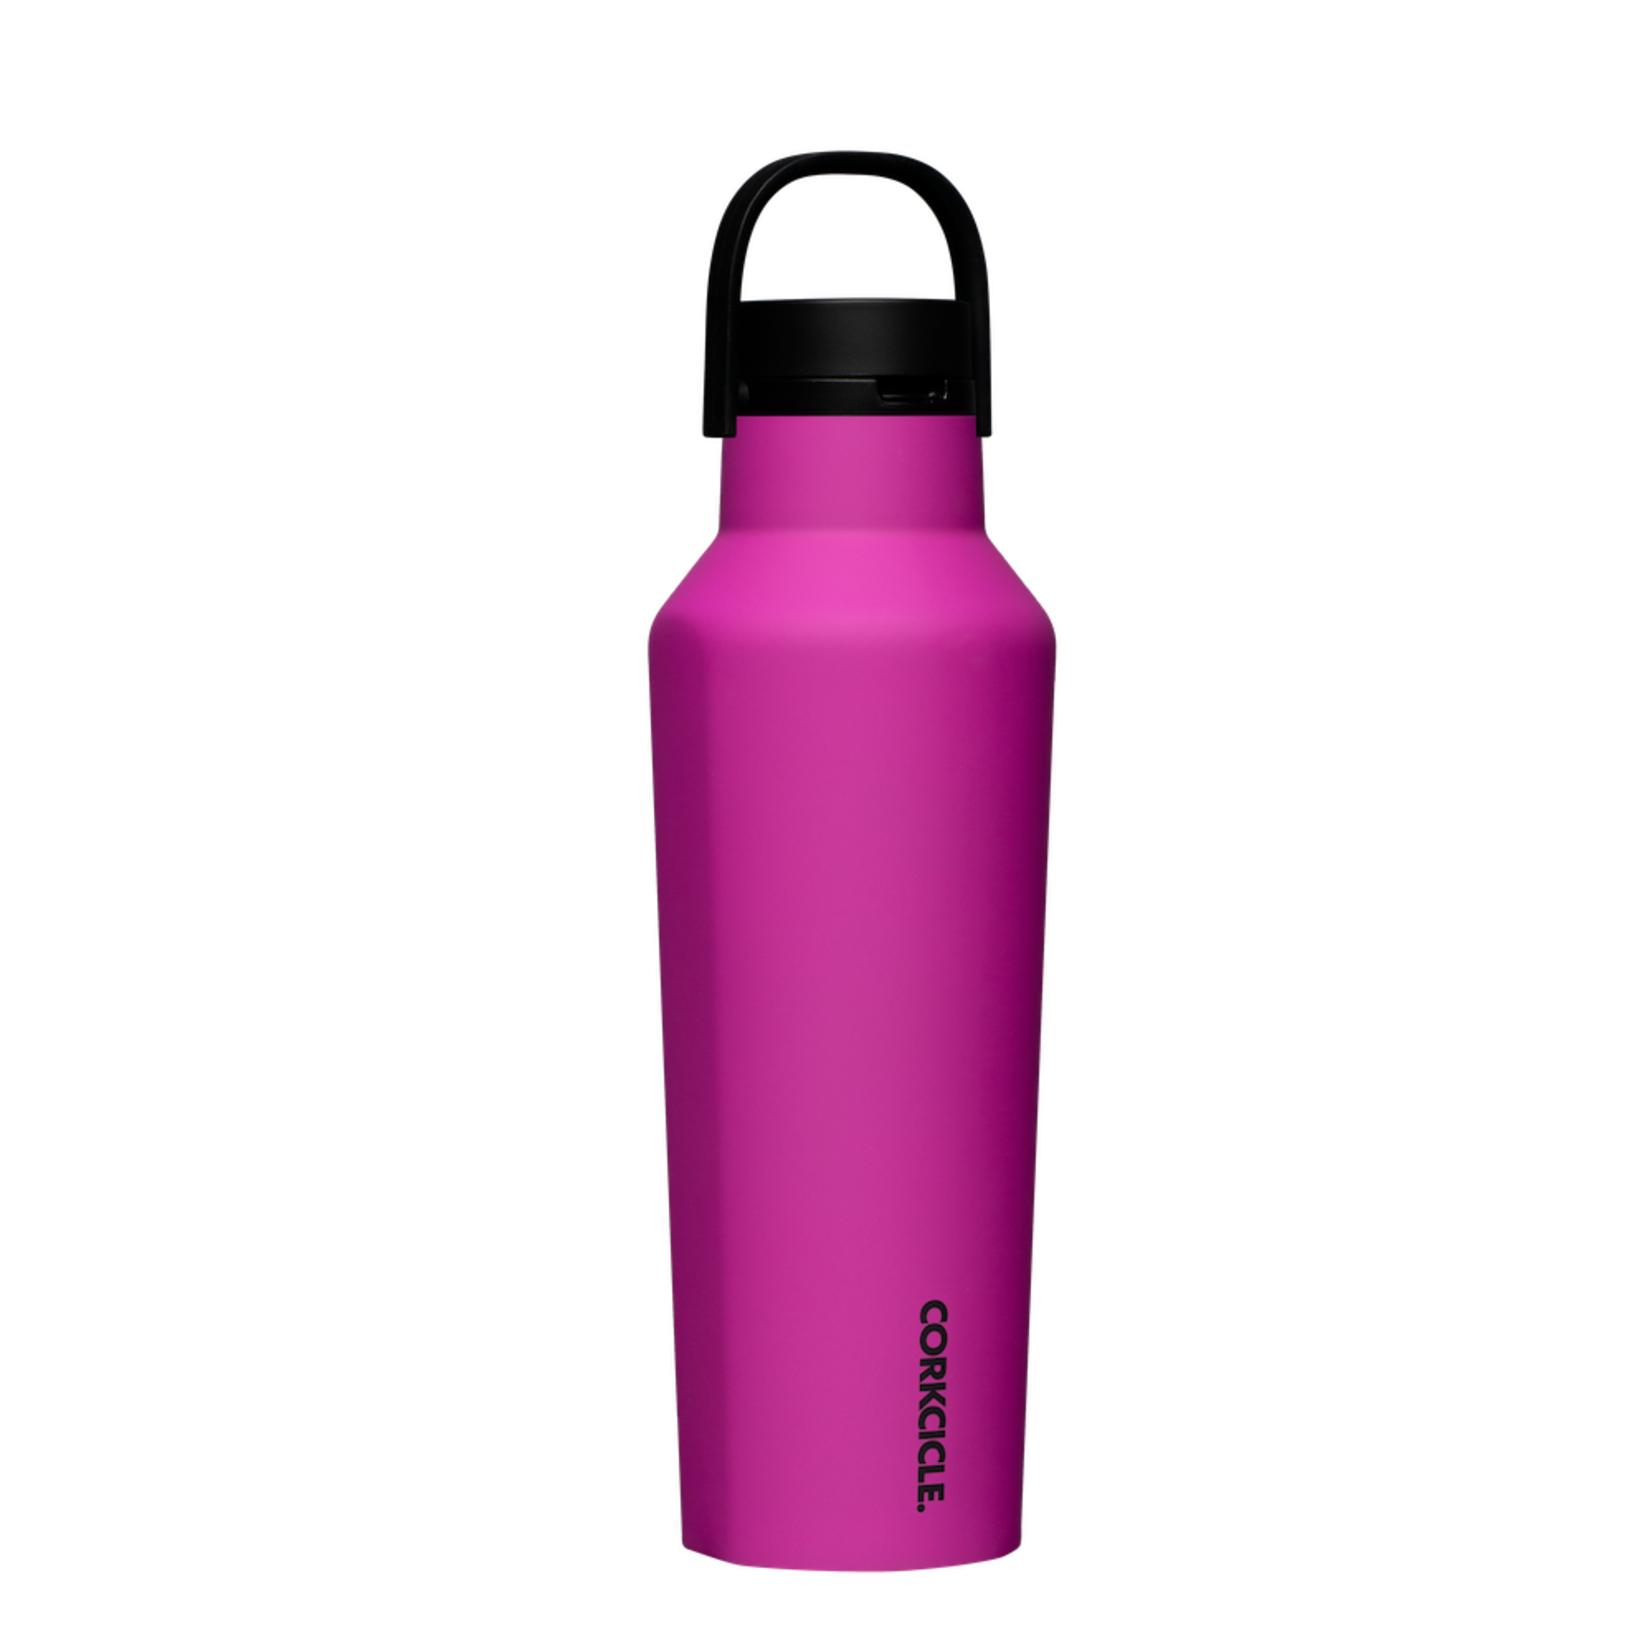 Corkcicle Corkcicle - 20oz Sport Canteen - Berry Punch